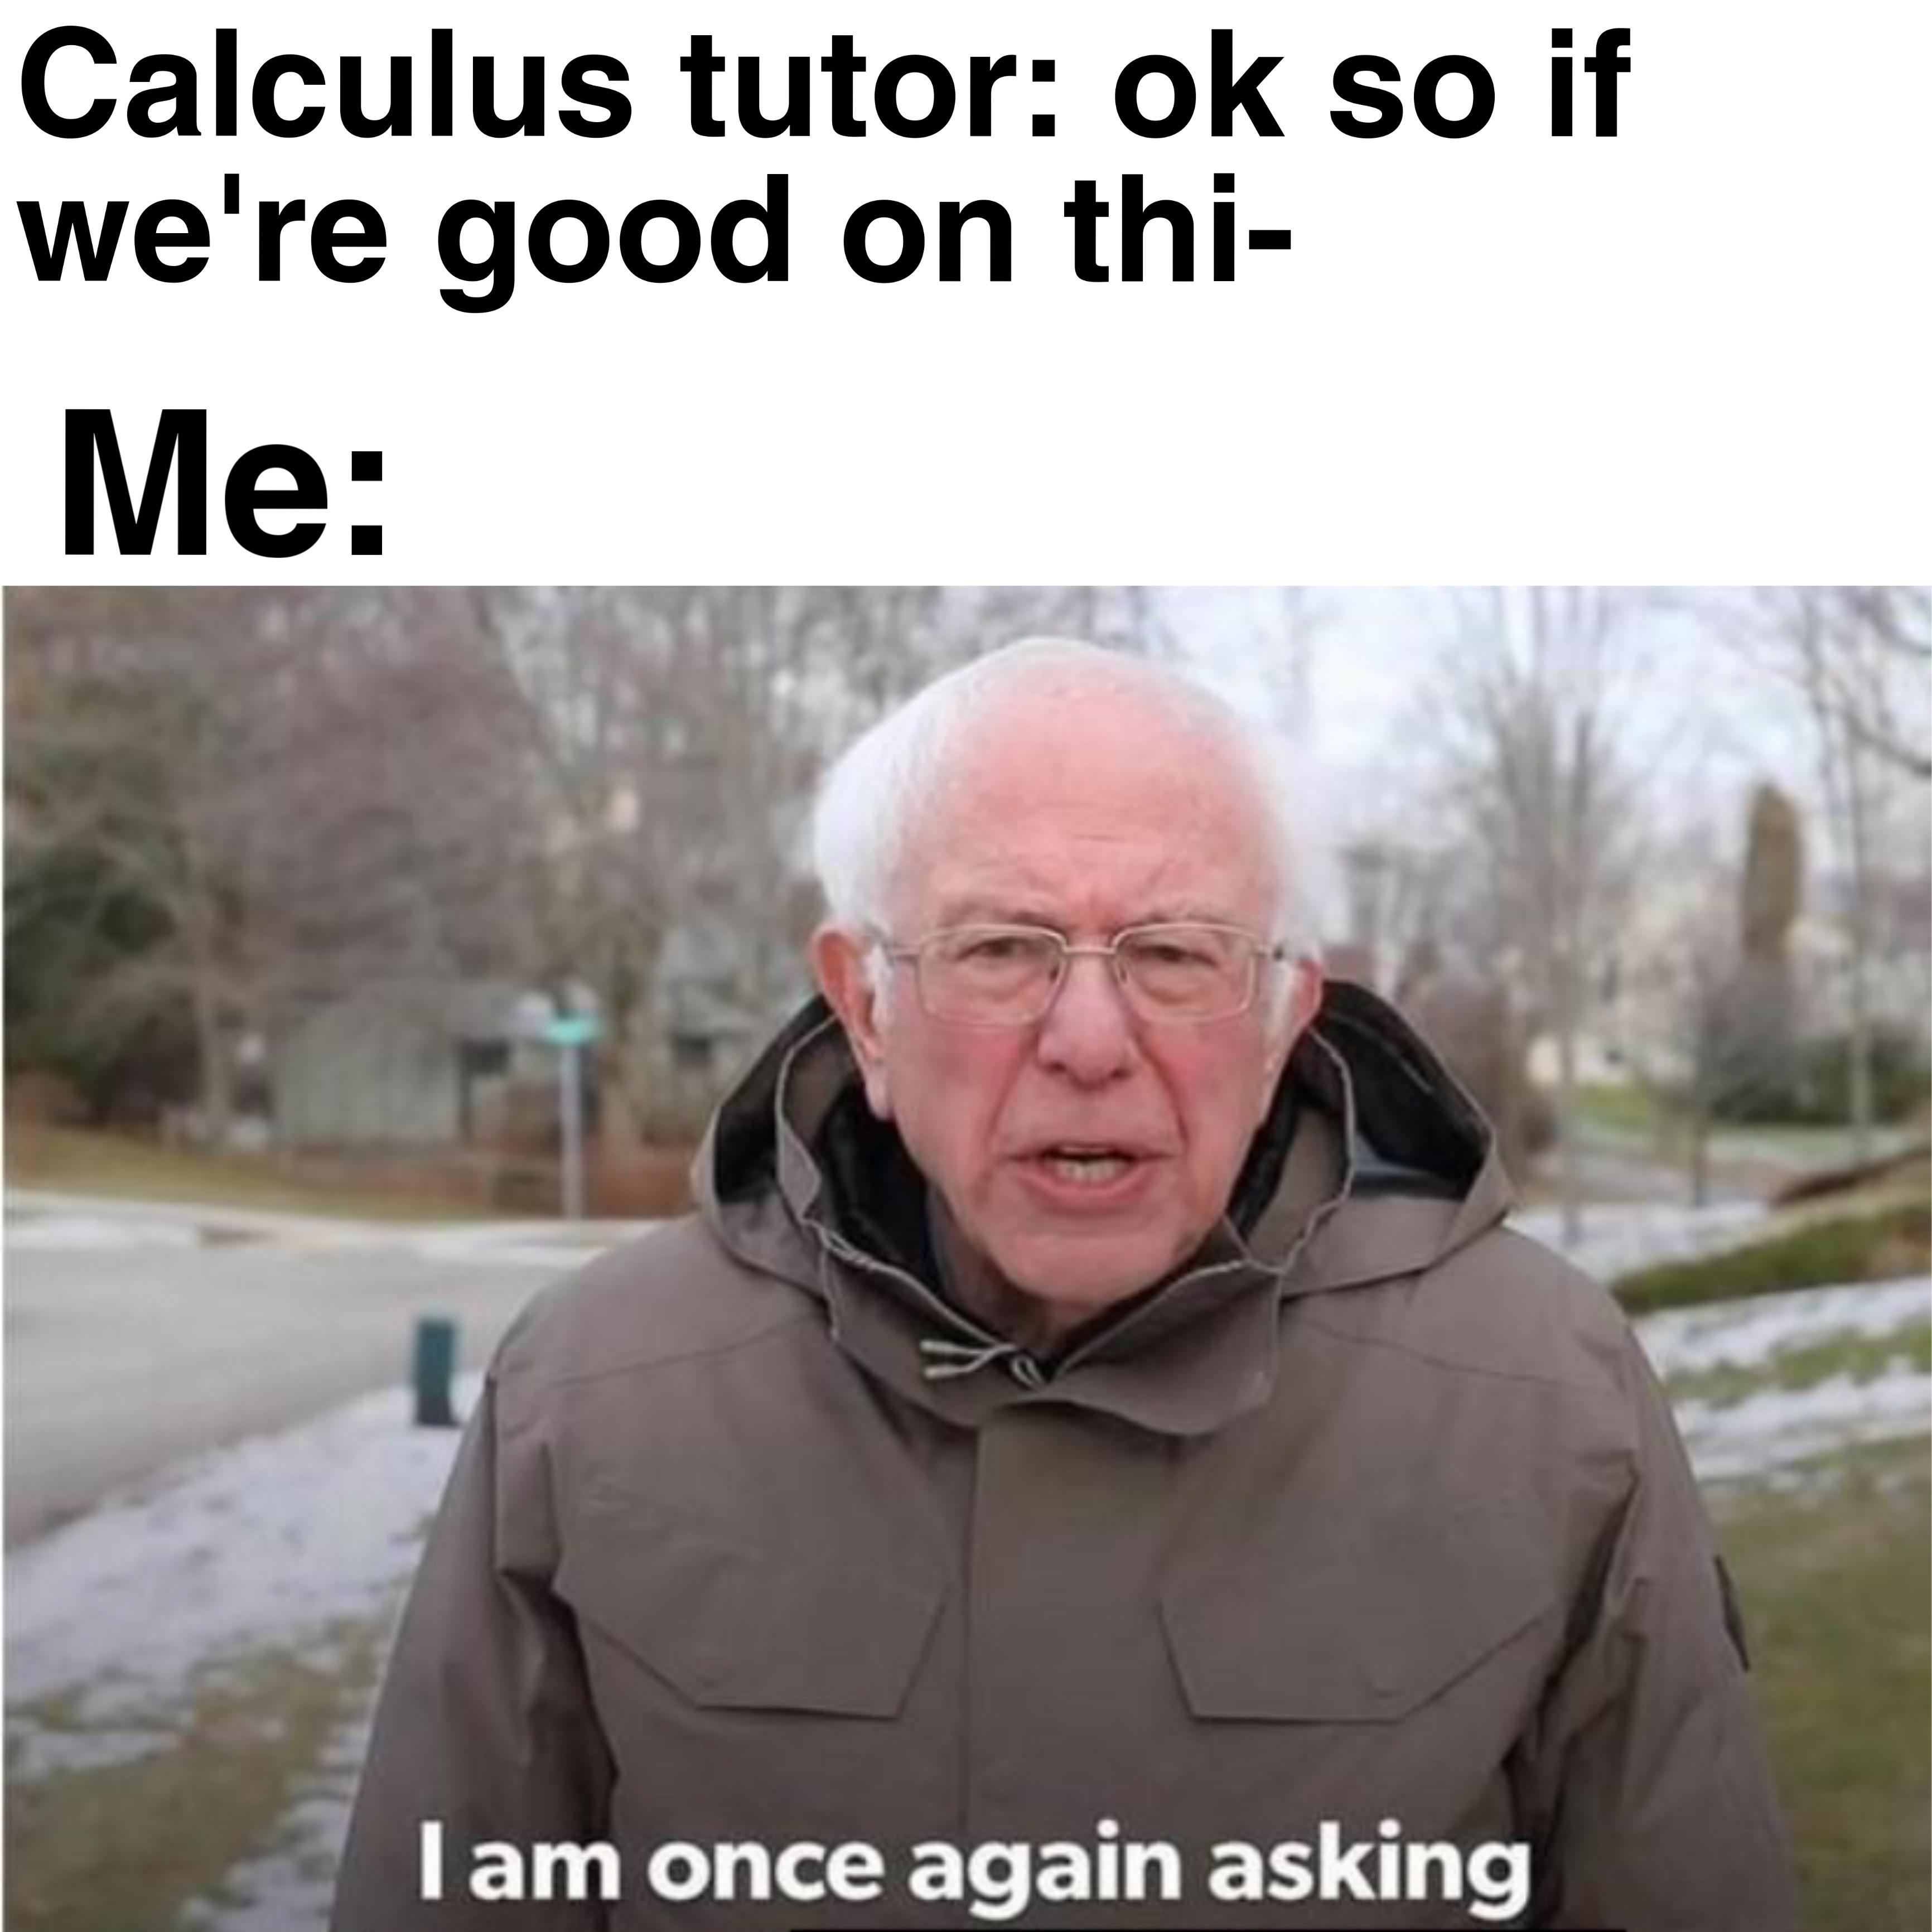 r/collegememes- college dank memes - aoe2 memes - Calculus tutor ok so if we're good on thi Me I am once again asking